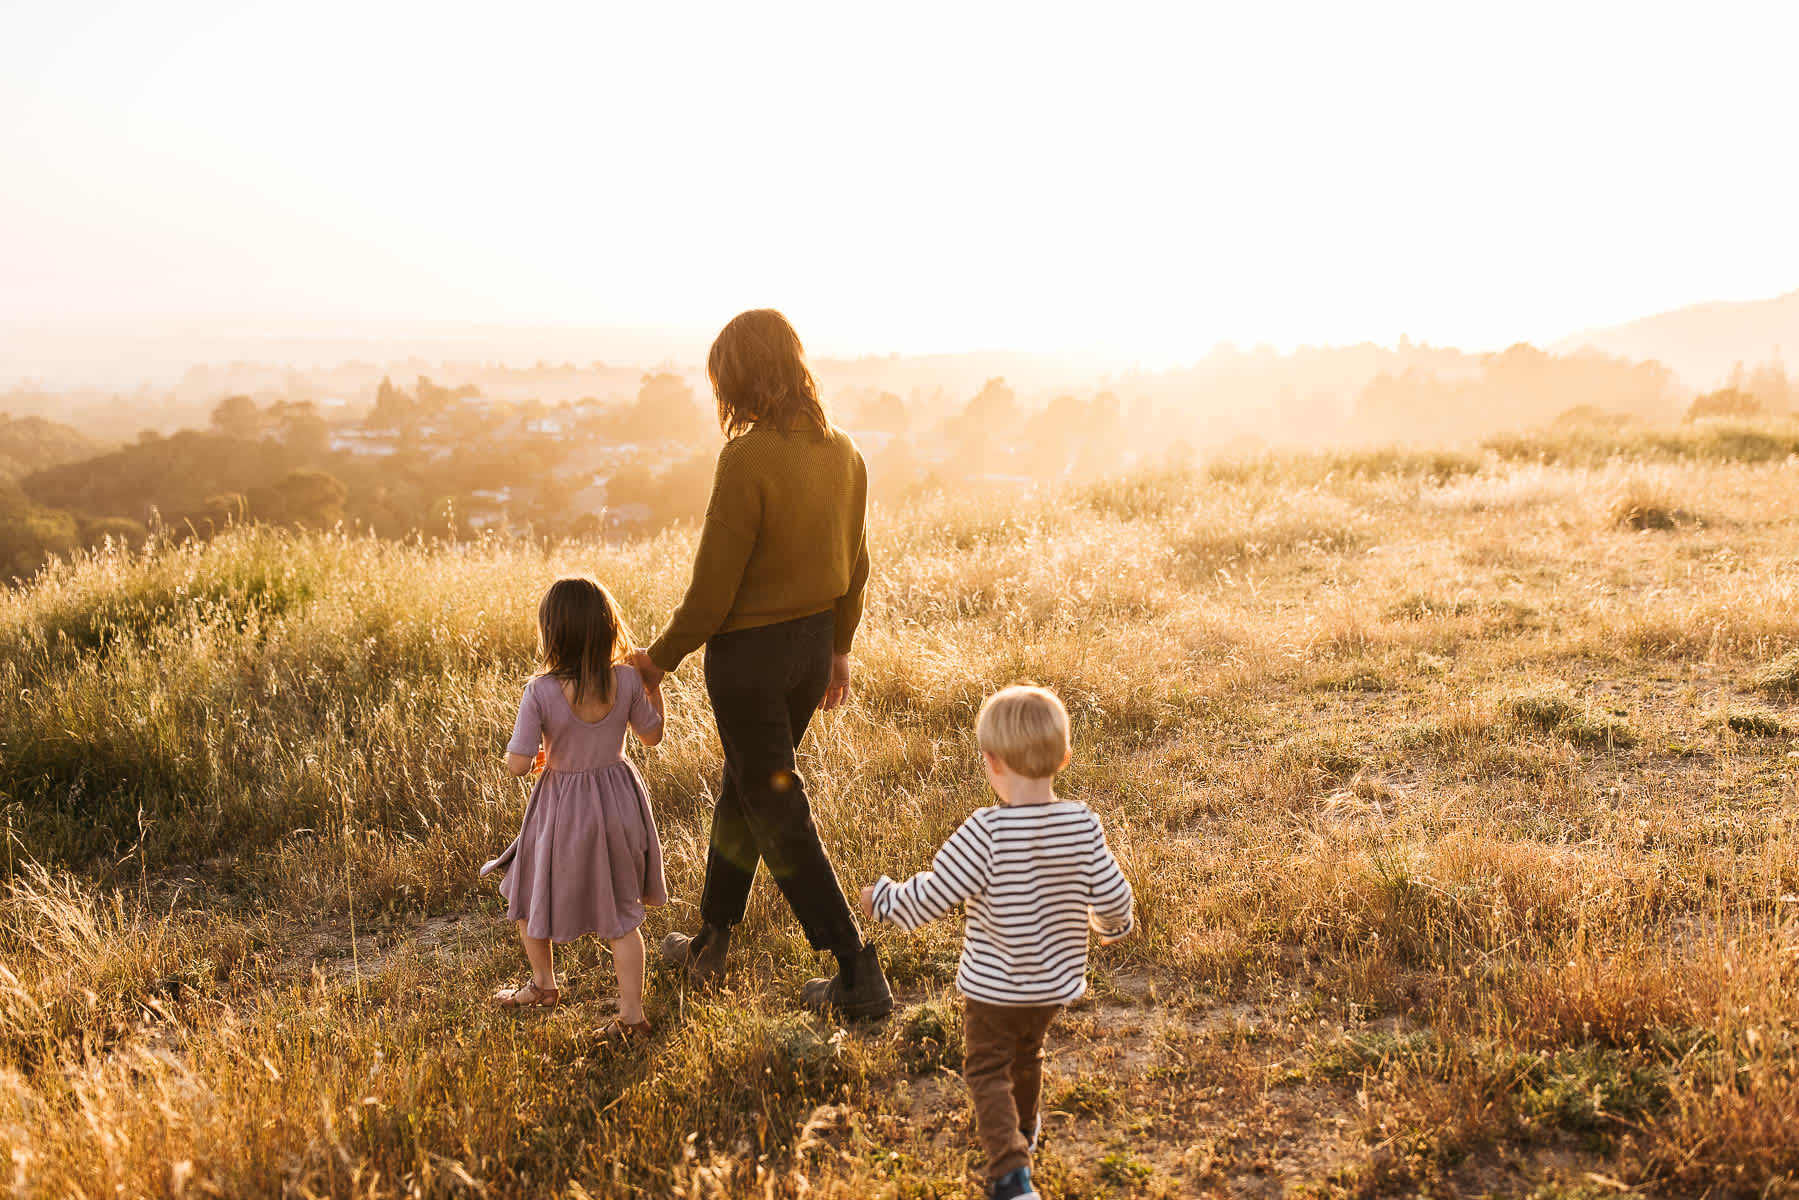 oakland-hills-golden-hour-lifestyle-family-session-13